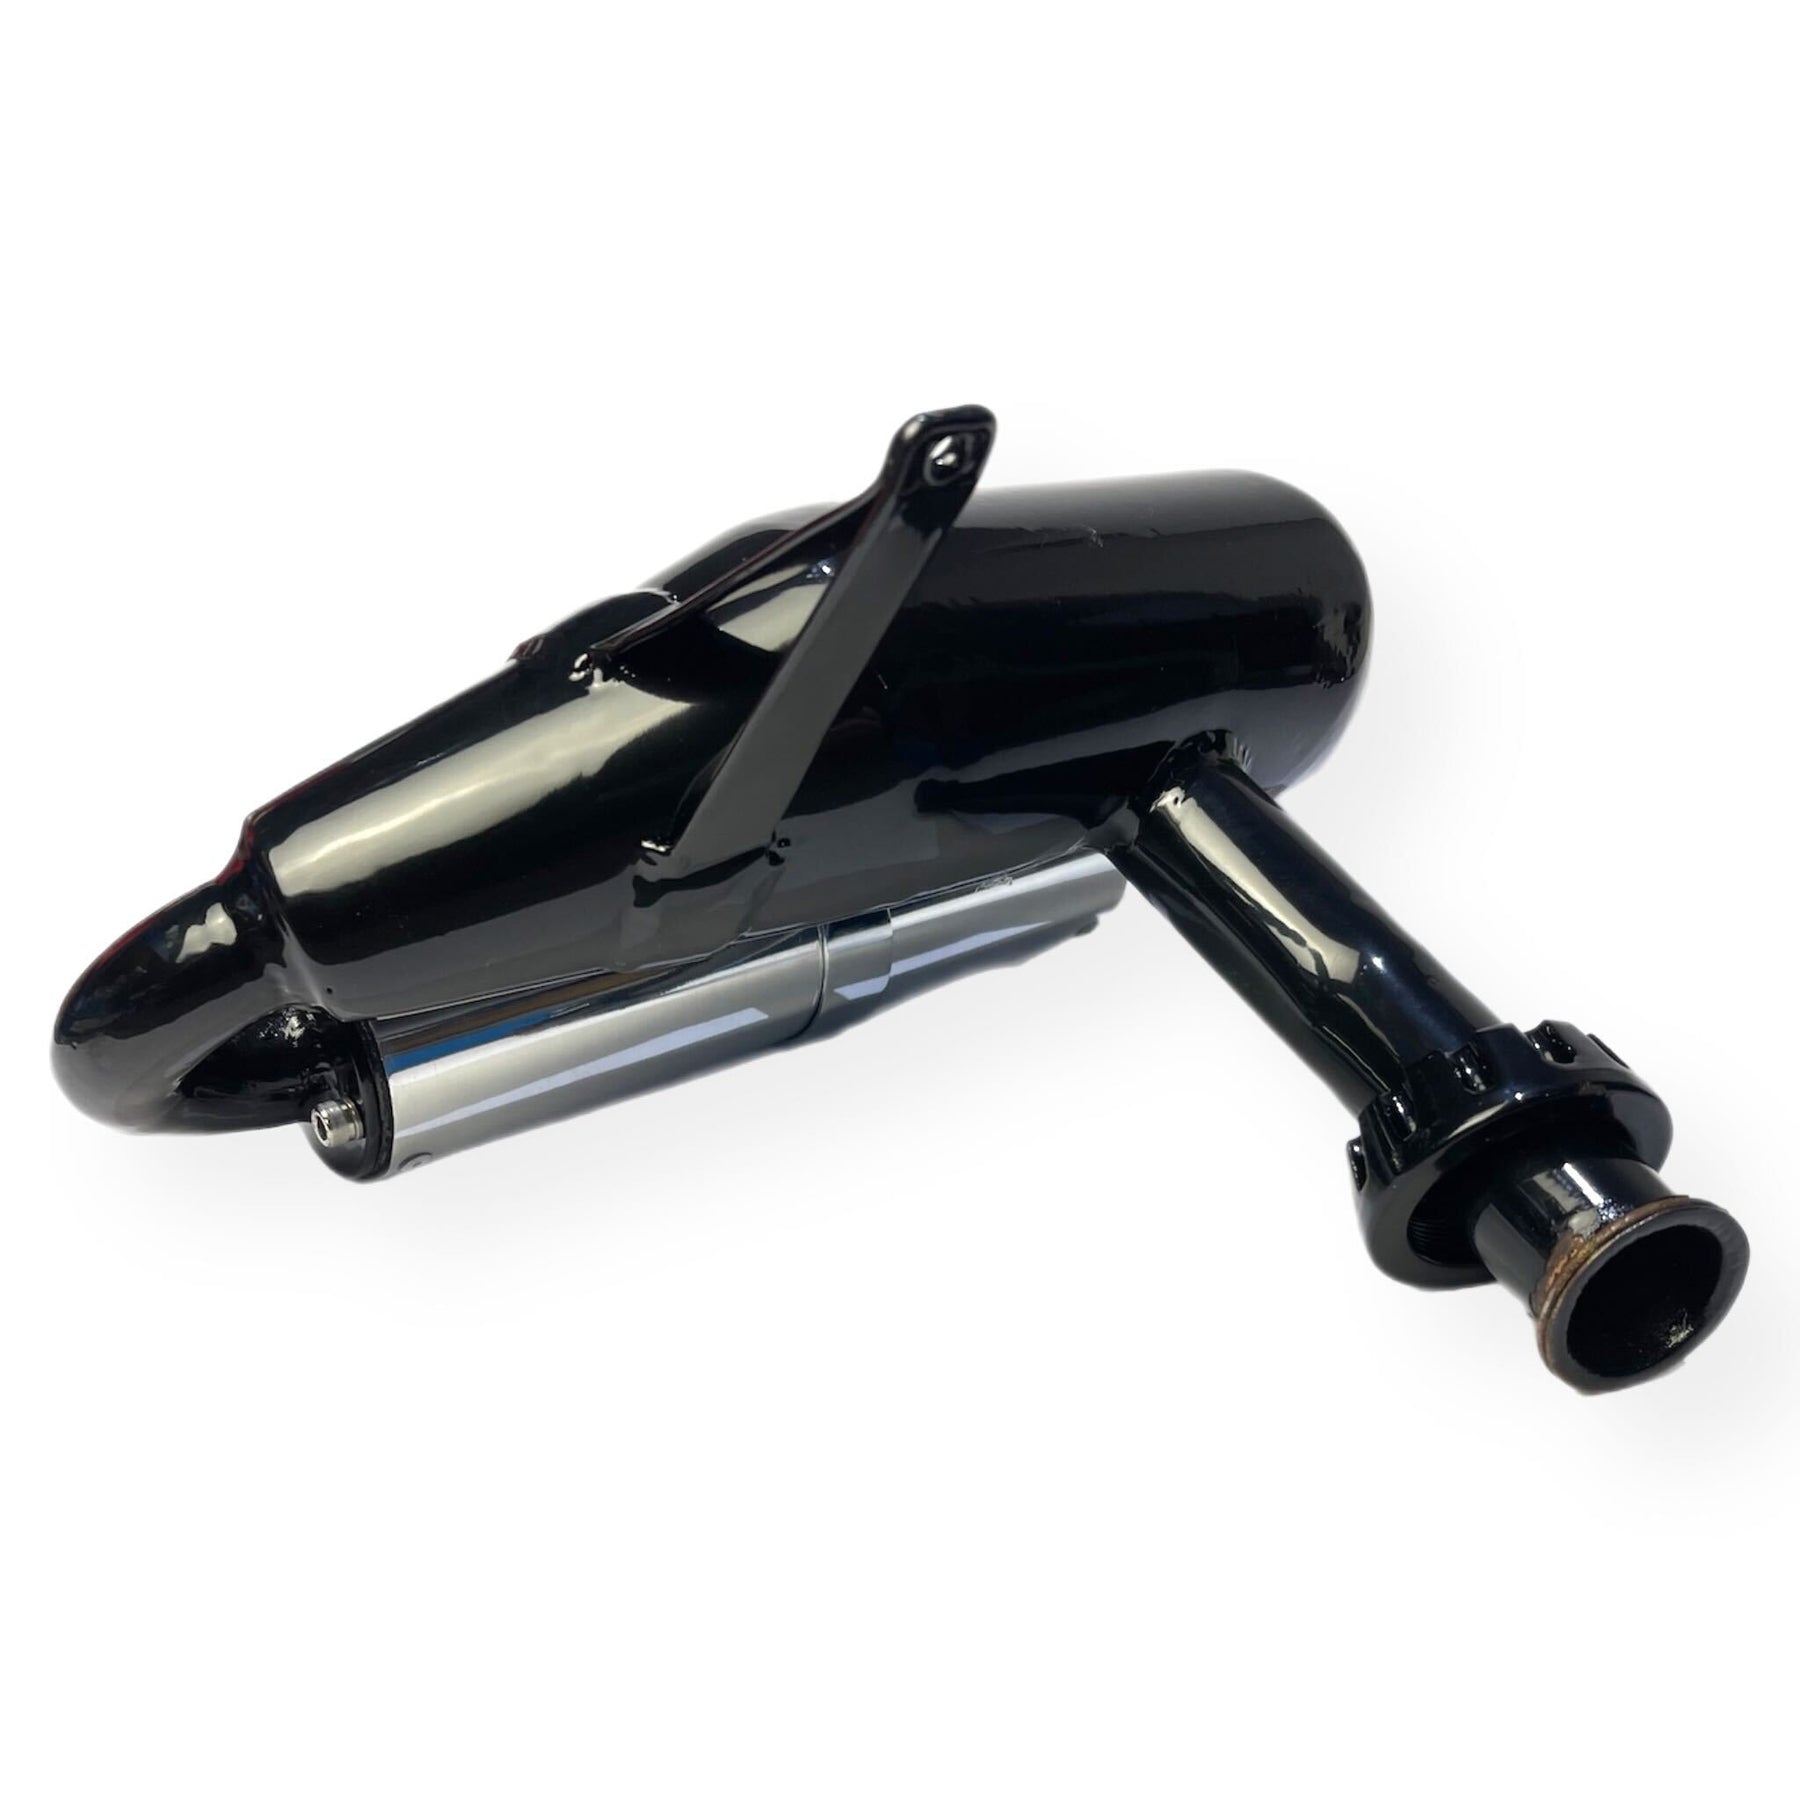 Lambretta LD Series 2 3 125-150cc Snail Pipe Exhaust - Black with Polished End Can